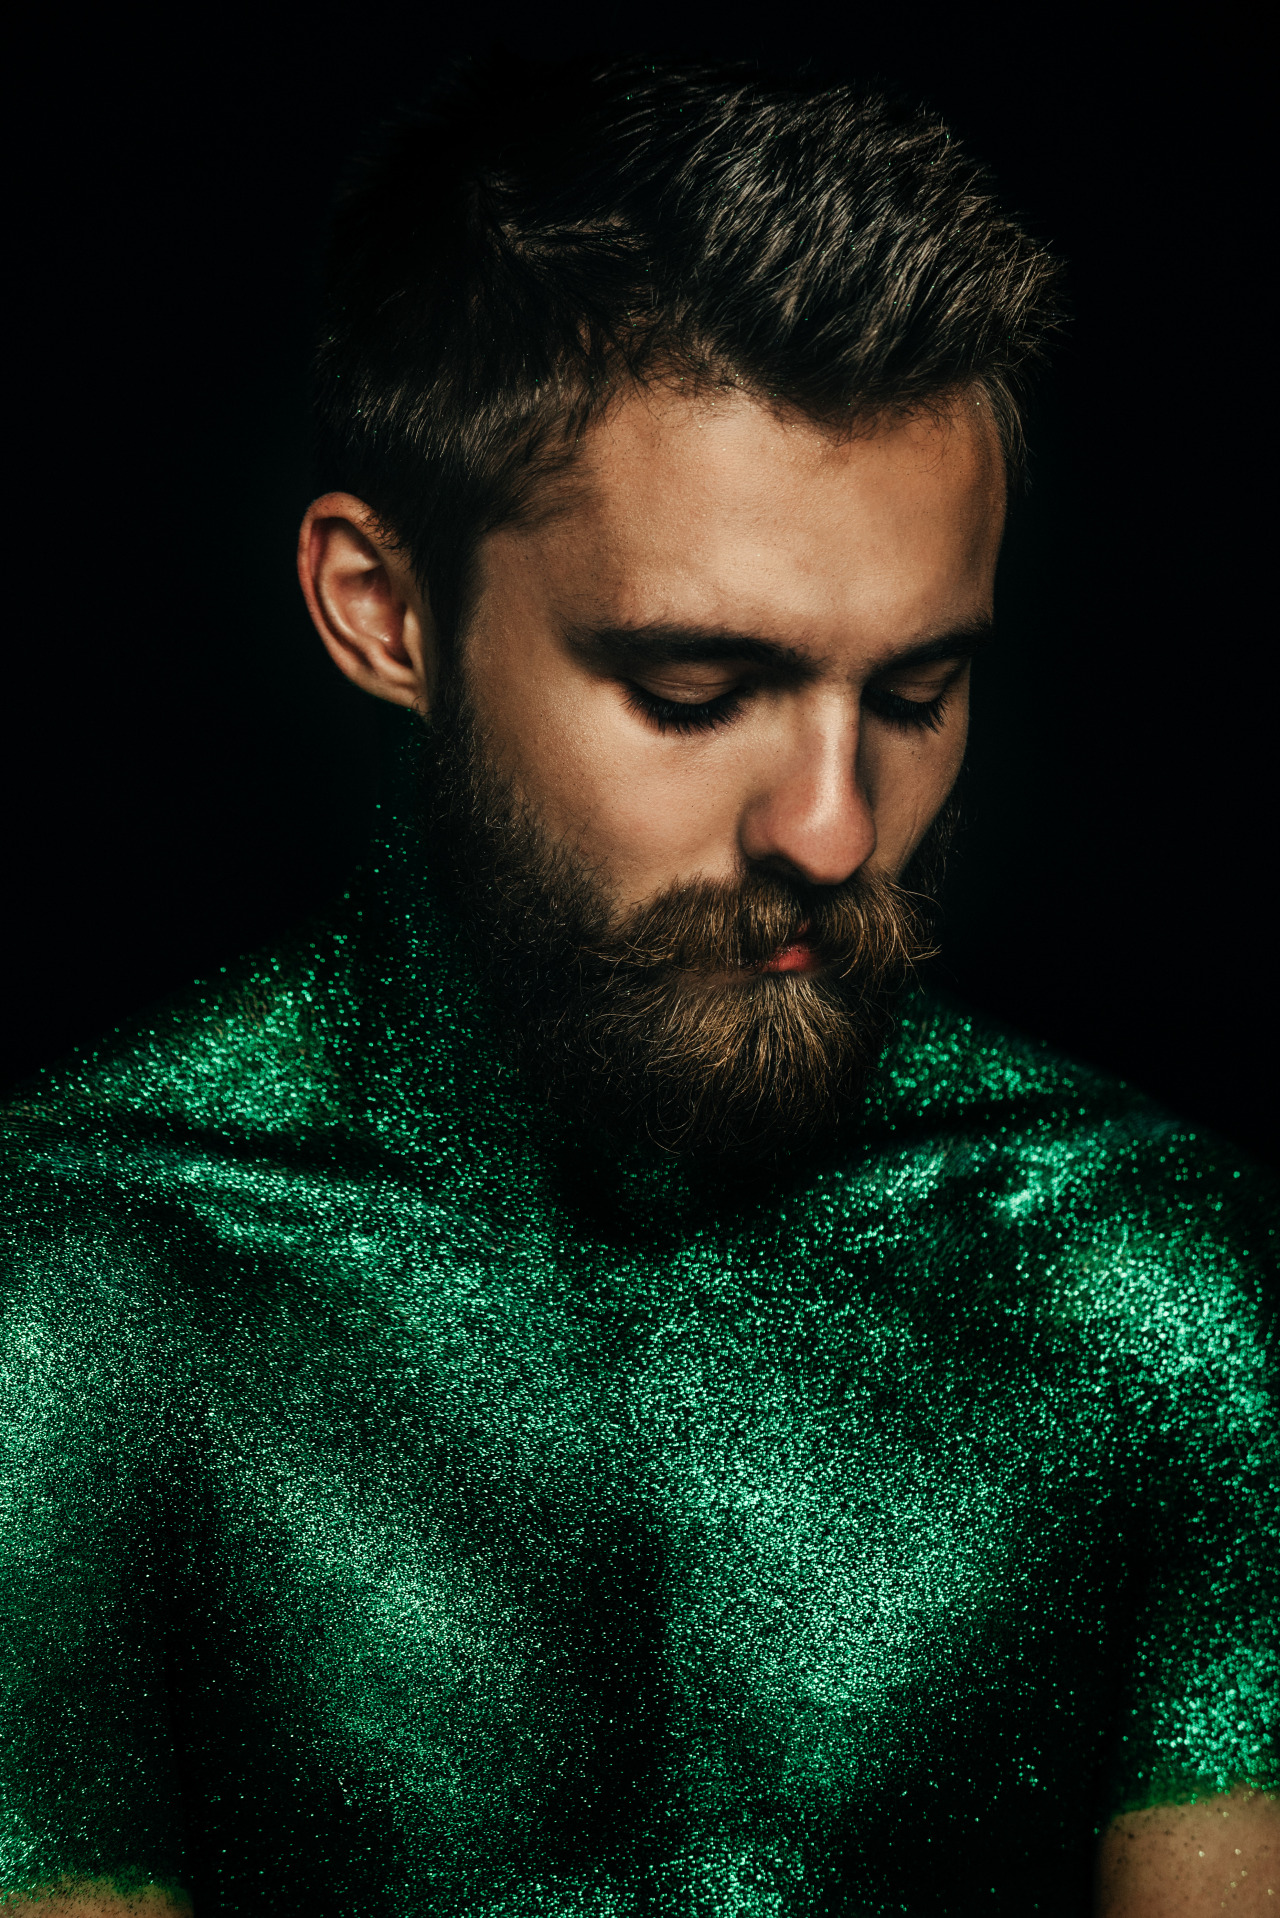 chris-parkes-esq: All That Glitters Is Green: Volume I Photography by chris-parkes-esq